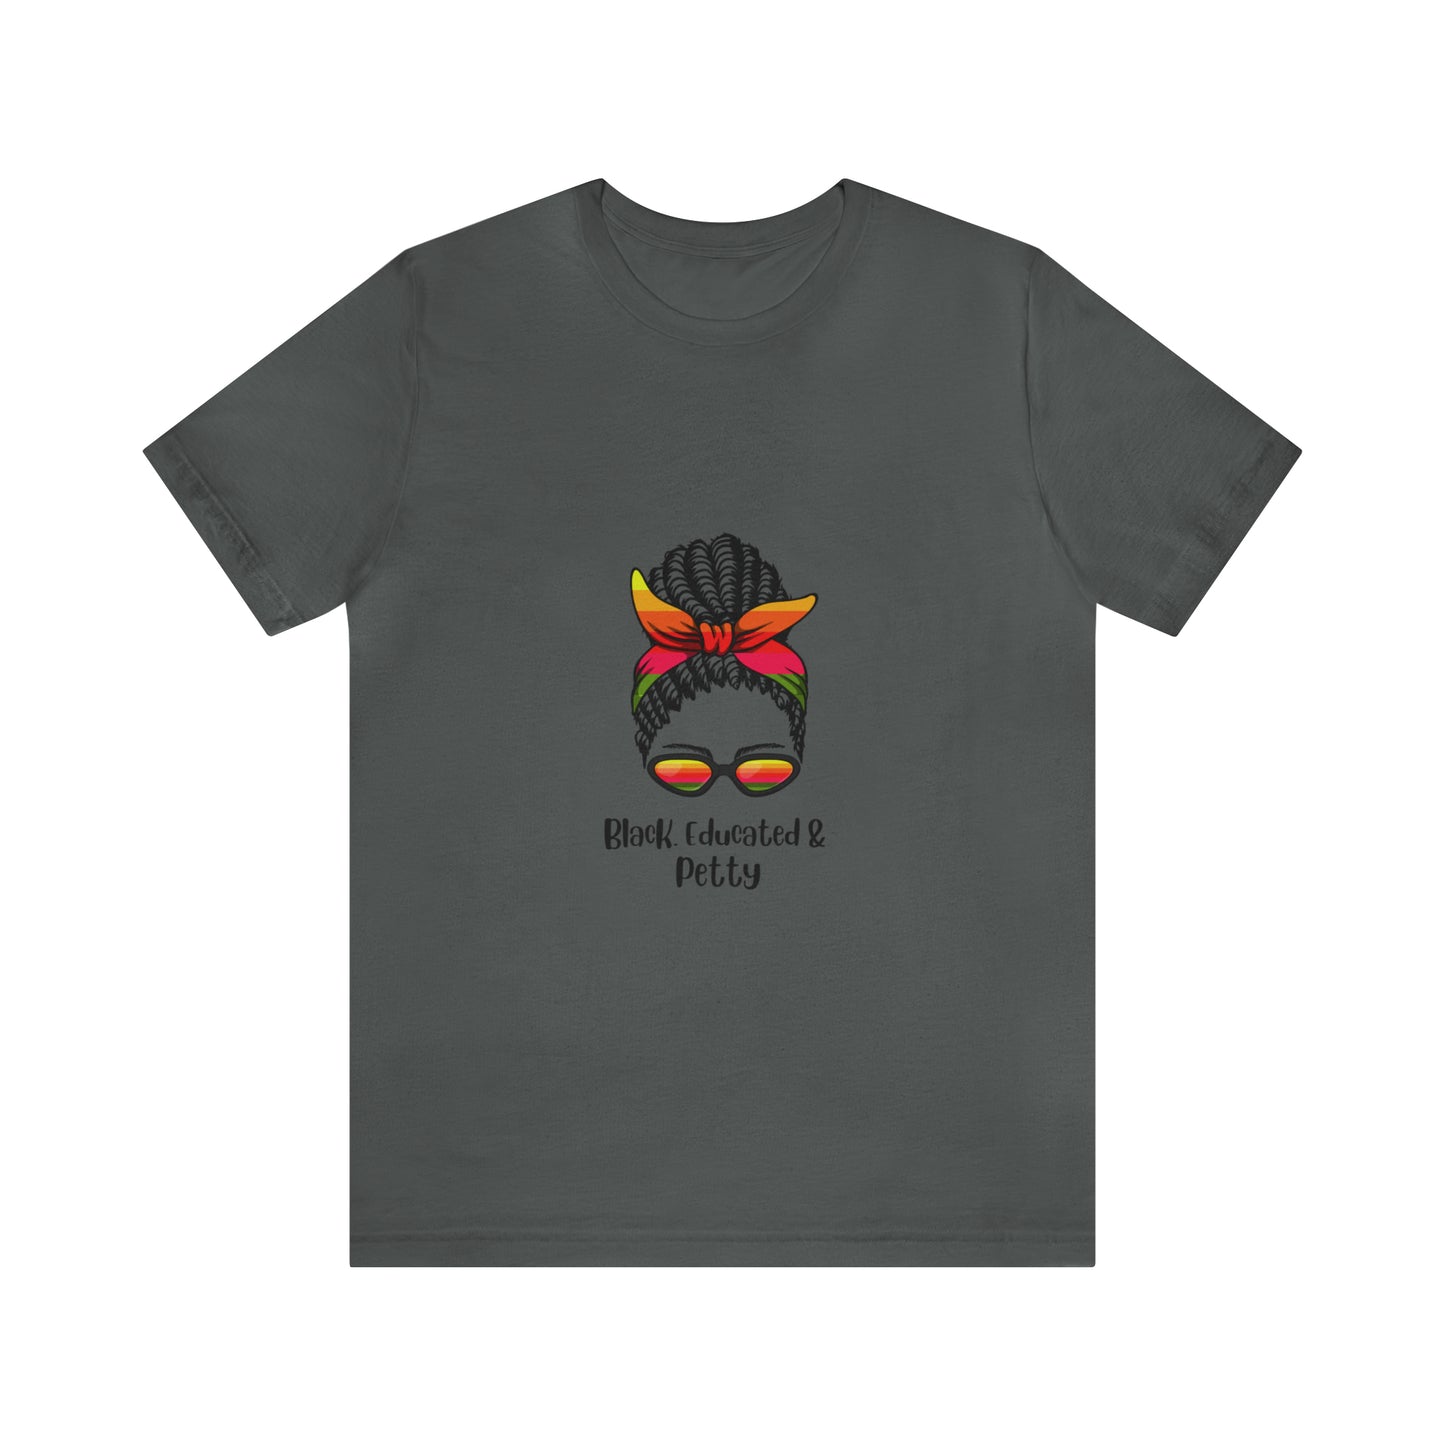 Black, Educated, and Petty Tee